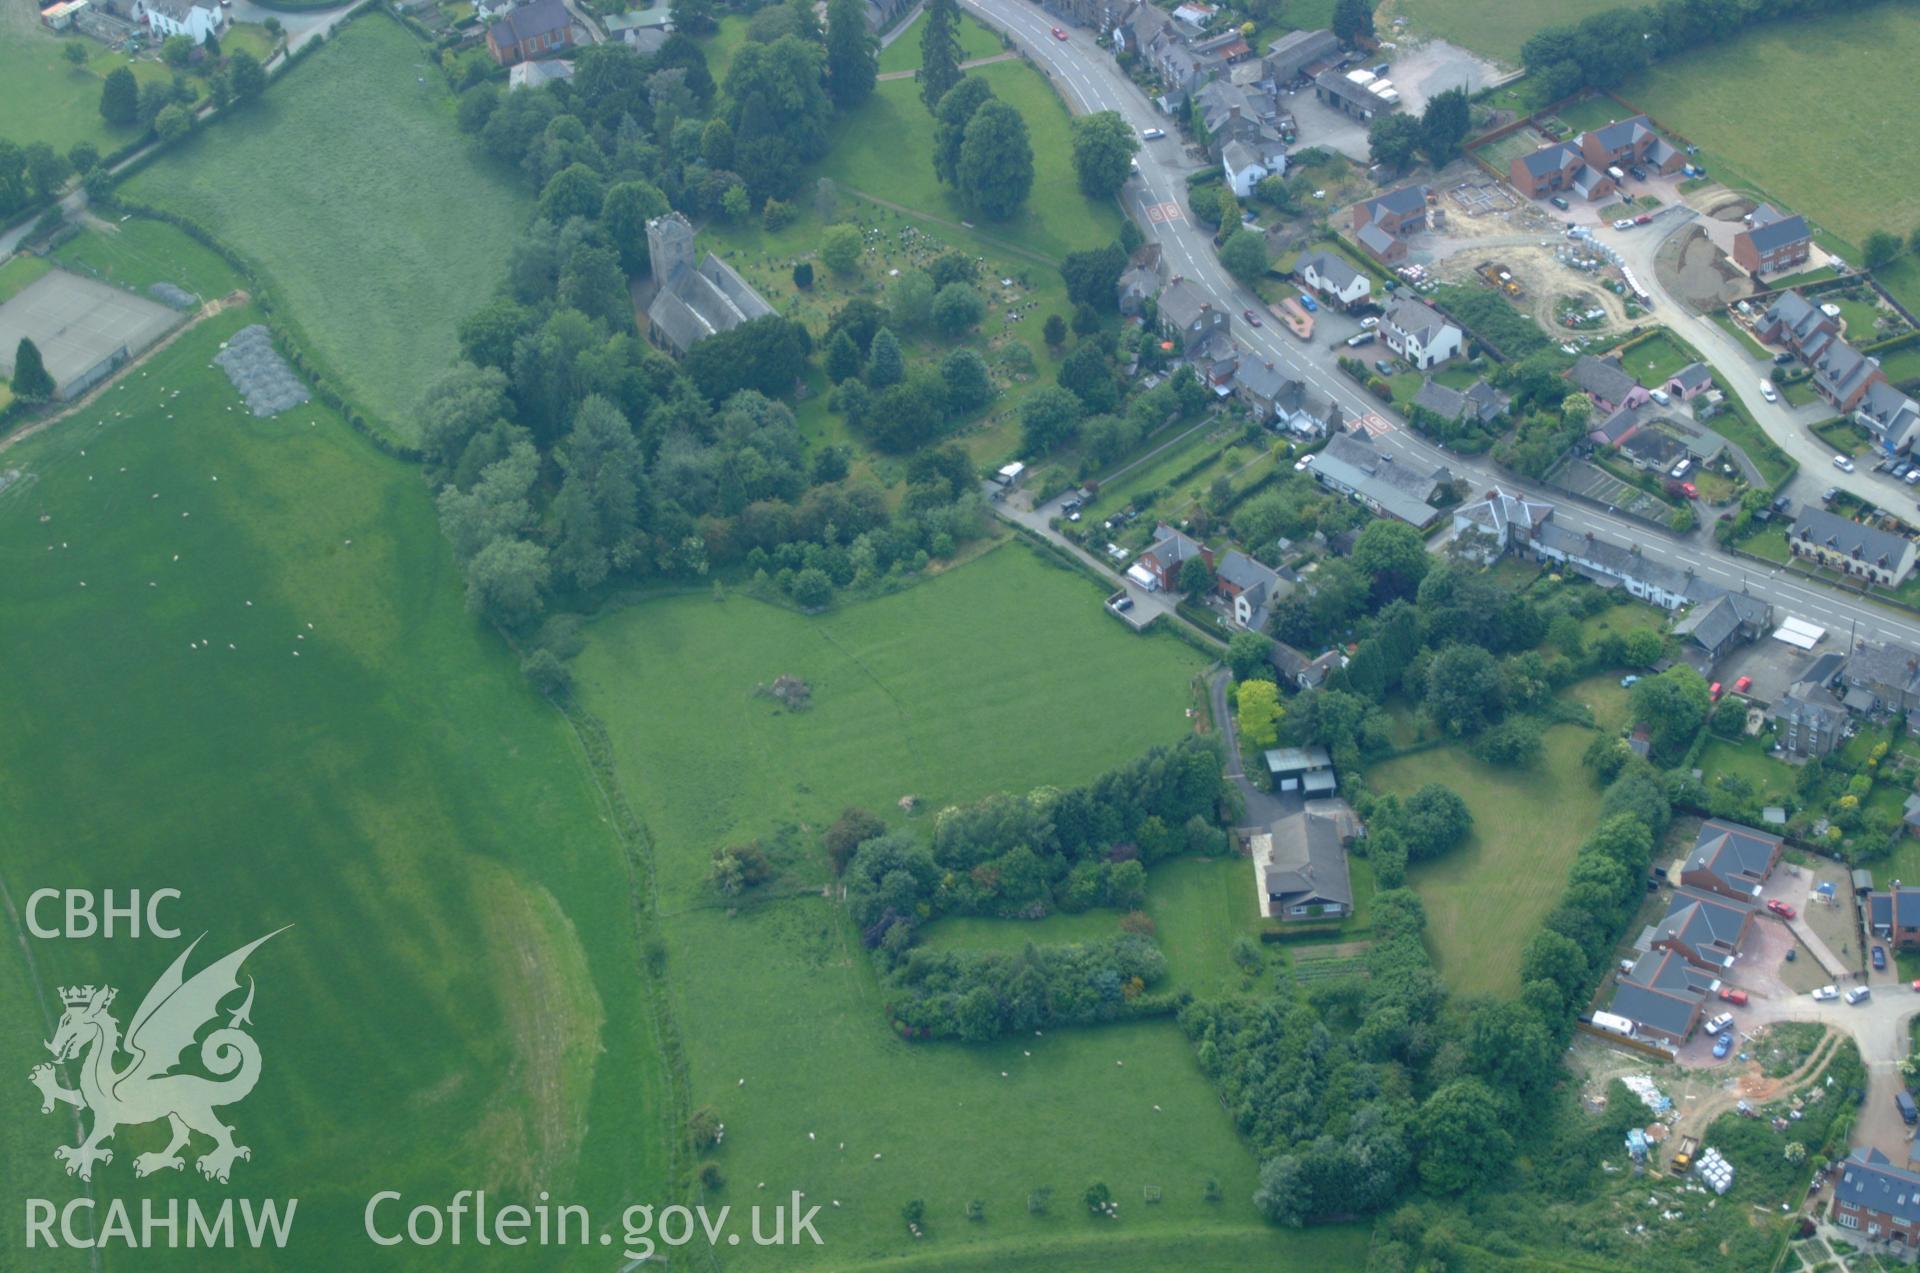 RCAHMW colour oblique aerial photograph of St Tysilio and St Mary's Church, Meifod taken on 08/06/2004 by Toby Driver